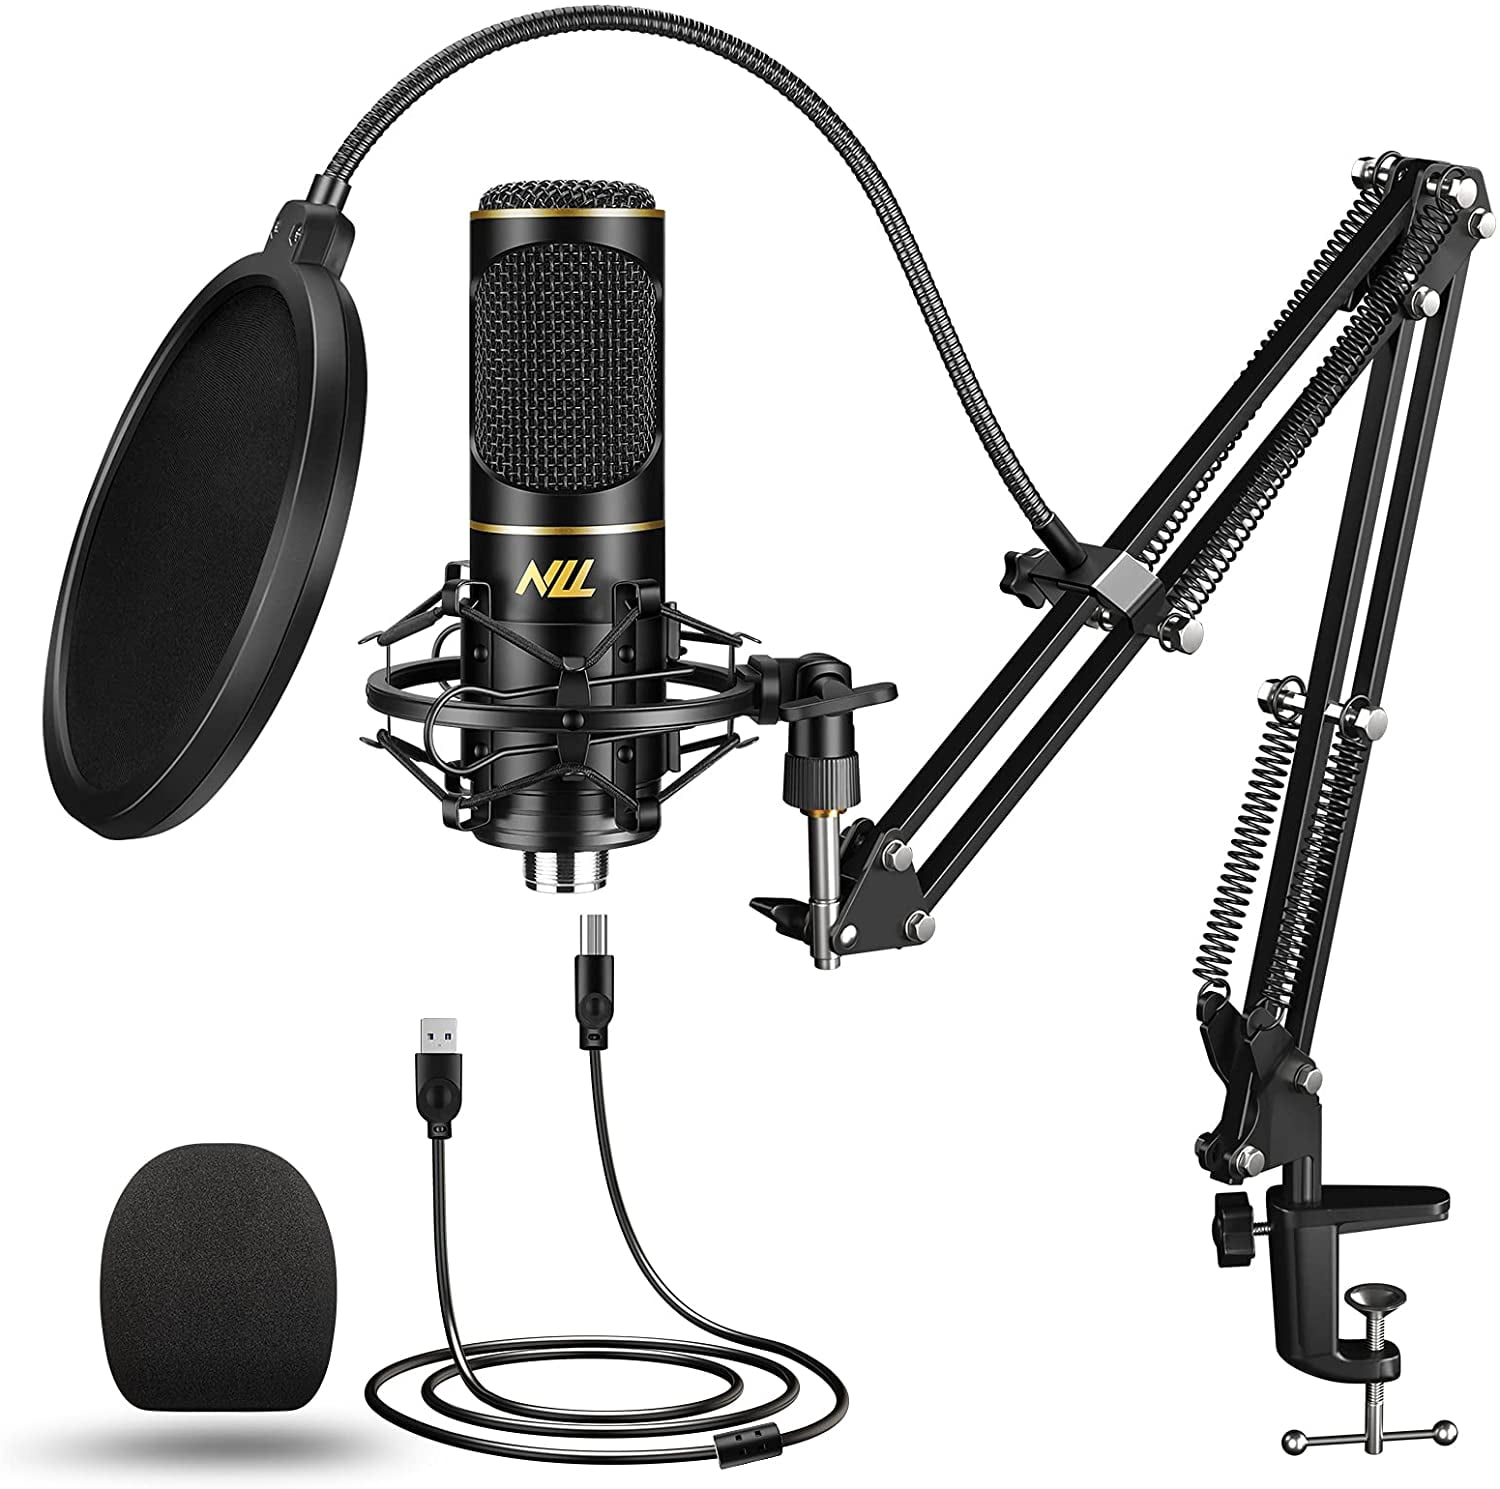 Kirkestol liste geni USB Microphone for Computer PC NLL Podcast Condenser Microphone Kit for  Singing Streaming Studio Recording Gaming Microphone with Stand Shock Mount  Pop Filter NC-011 - Walmart.com